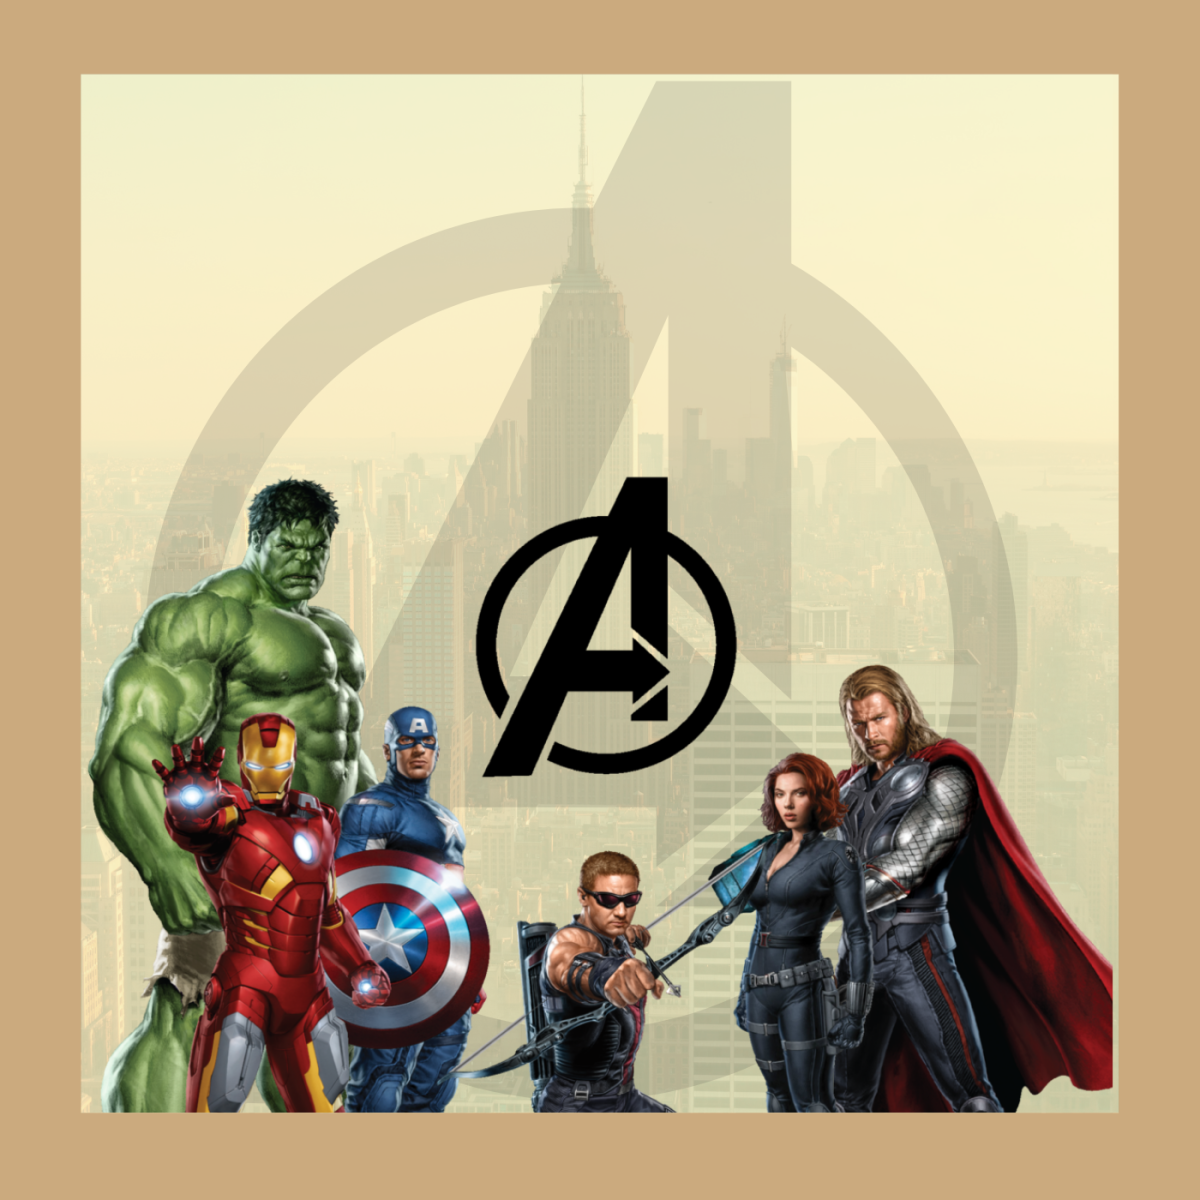 In 2012, the original avengers assembled to fight Loki and his Chitauri army during the Battle of New York.